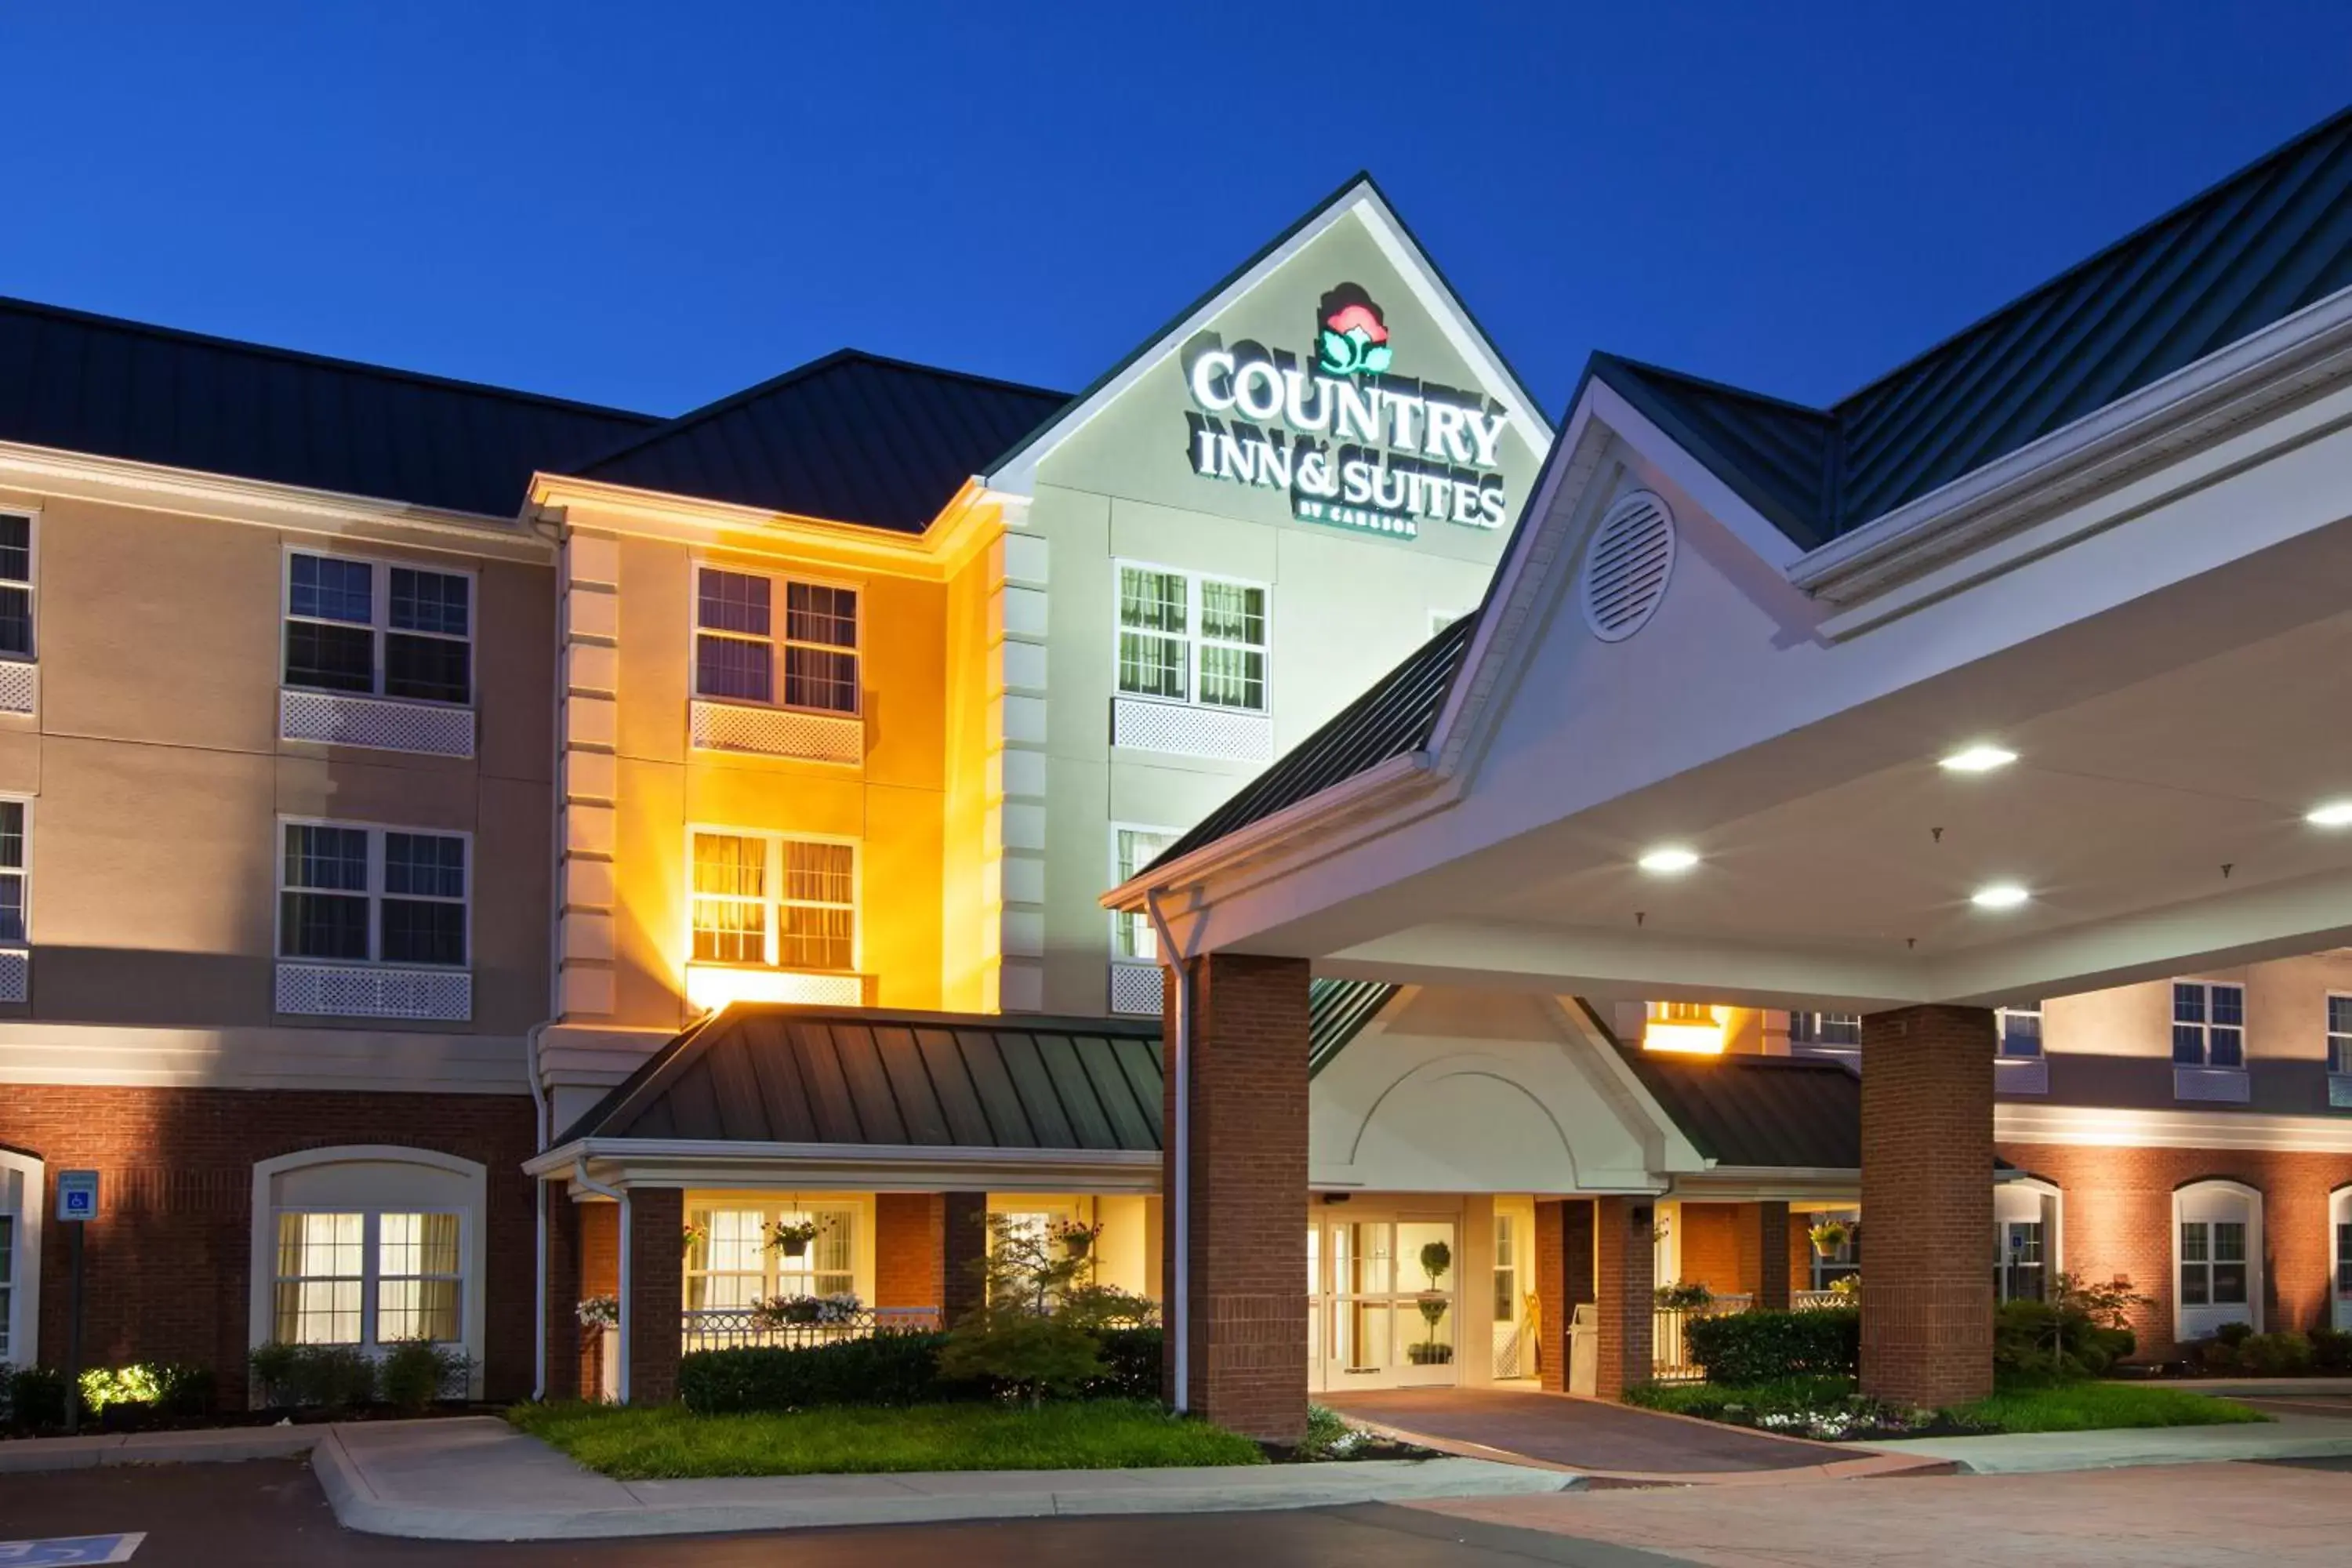 Facade/entrance, Property Building in Country Inn & Suites by Radisson, Knoxville West, TN